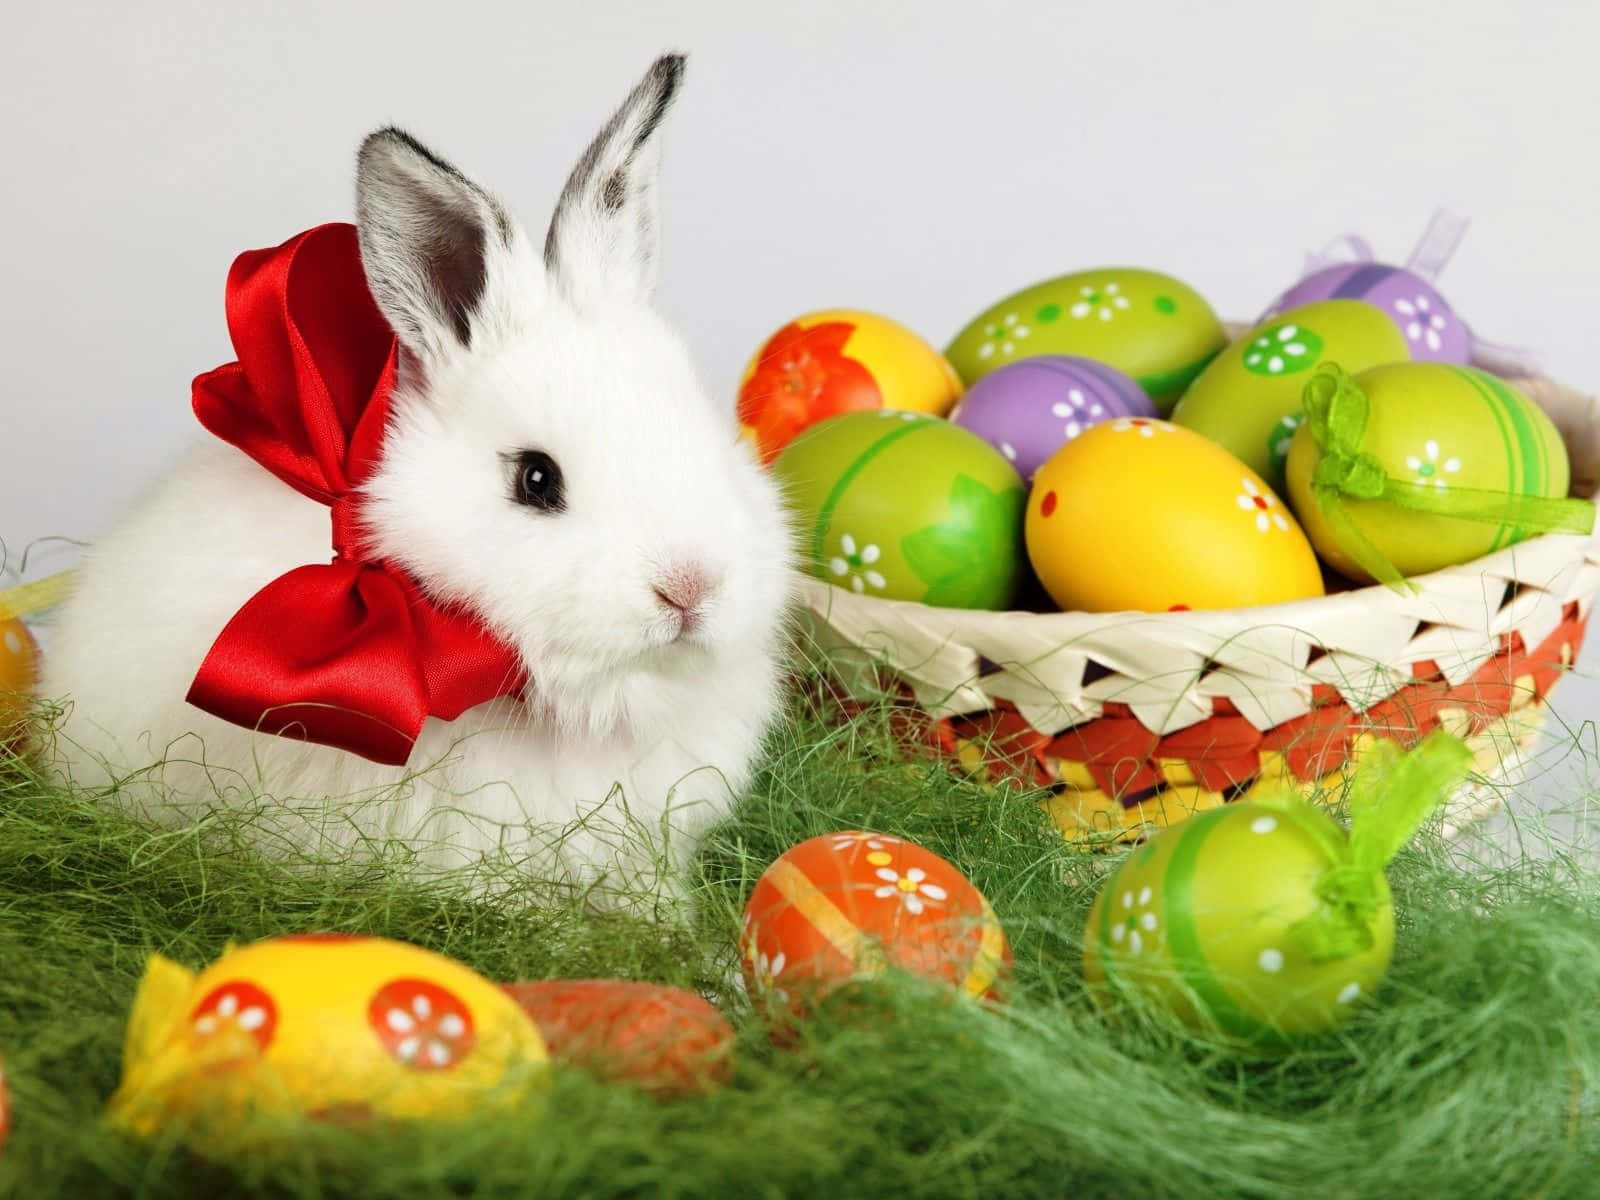 A Jovial Easter Bunny Amidst A Vibrant Easter Celebration.